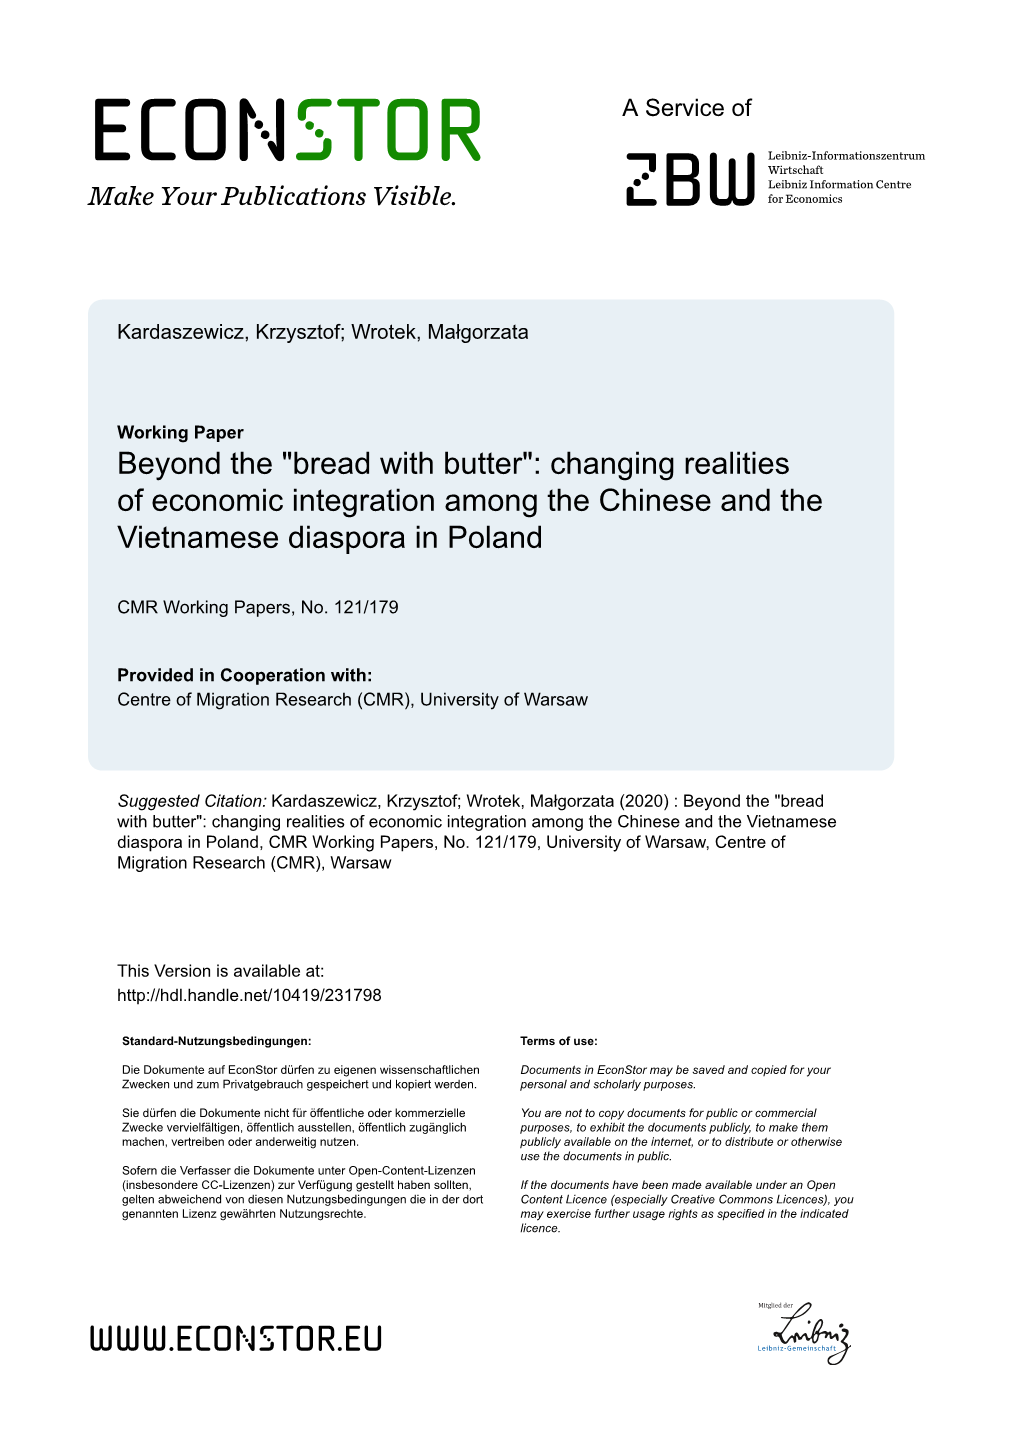 Changing Realities of Economic Integration Among the Chinese and the Vietnamese Diaspora in Poland